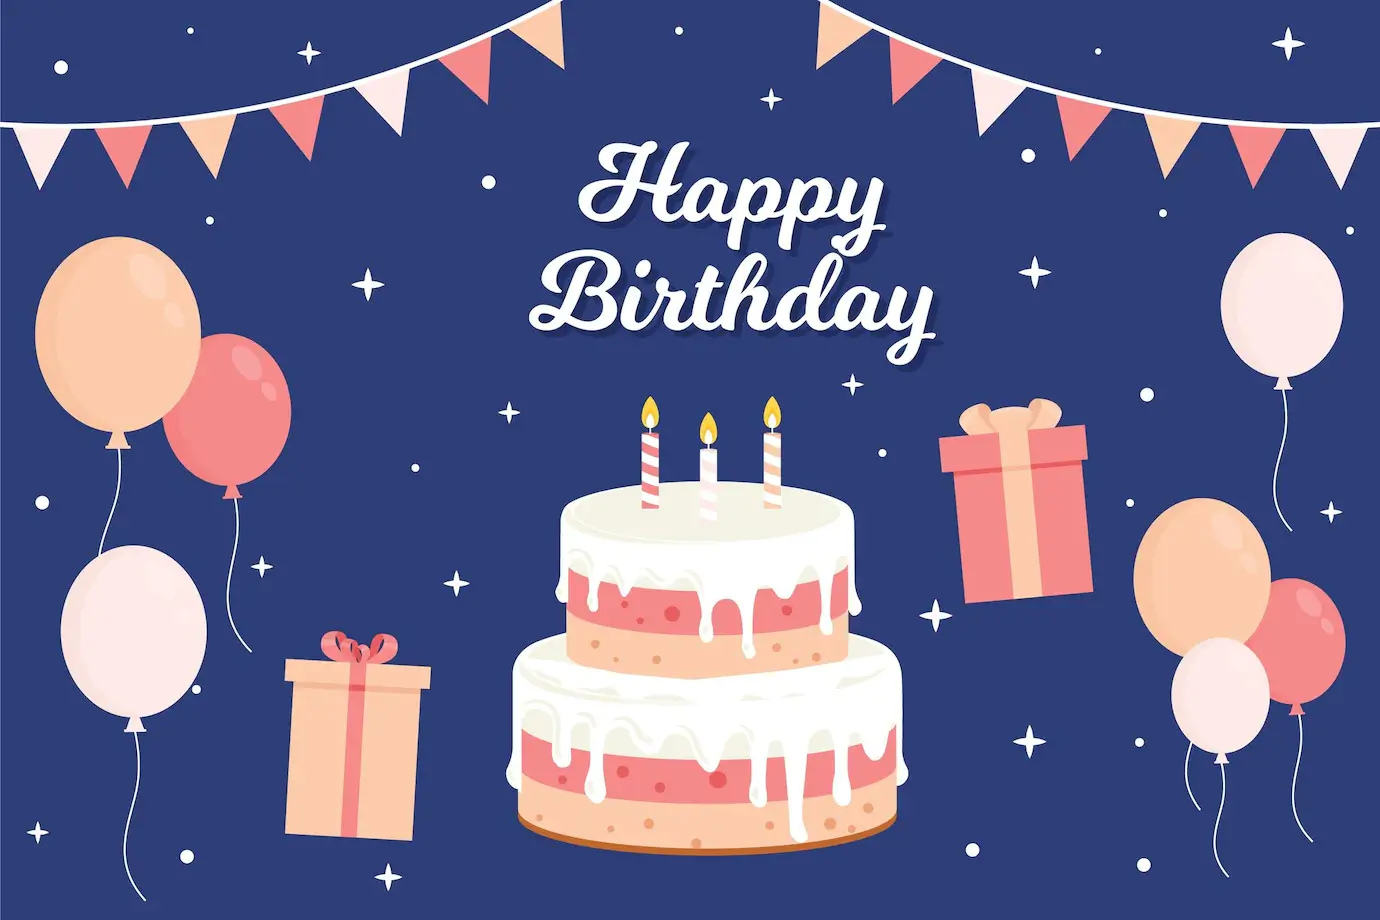 Happy Birthday Cousin Messages: Simple but Meaningful Happy Birthday Cousin Sayings